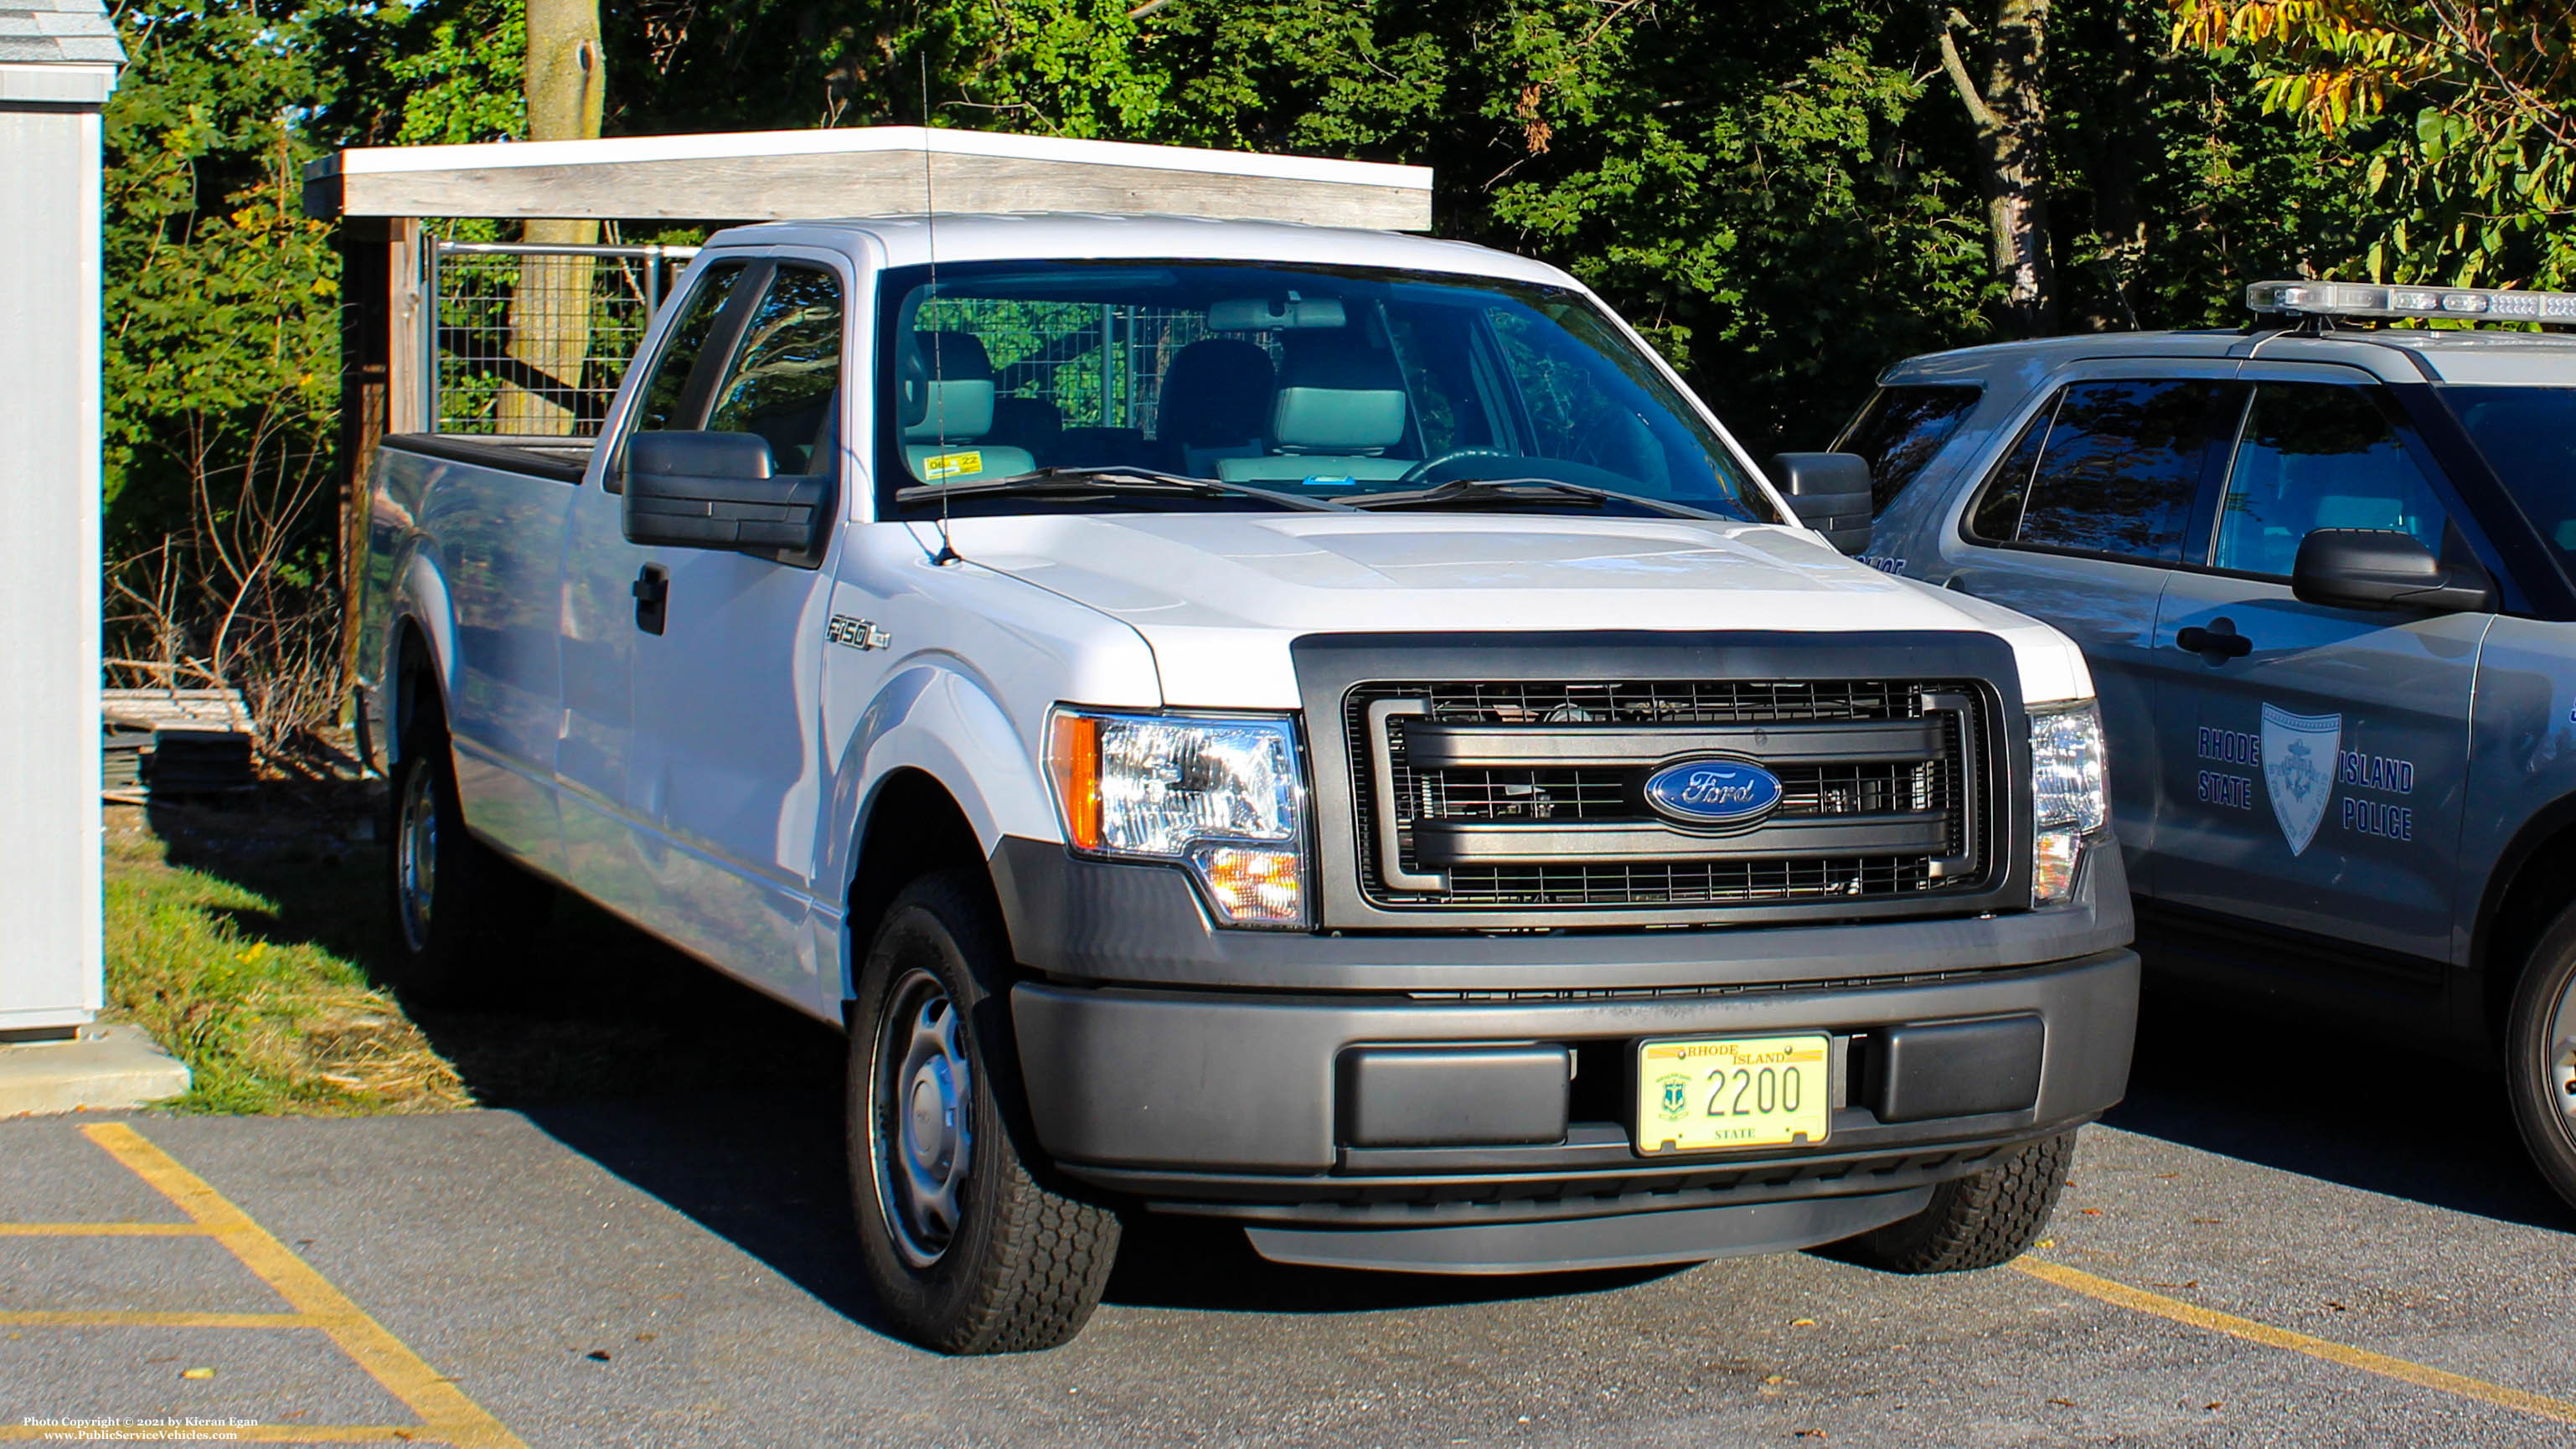 A photo  of Rhode Island State Police
            Truck 2200, a 2009-2014 Ford F-150 SuperCab             taken by Kieran Egan